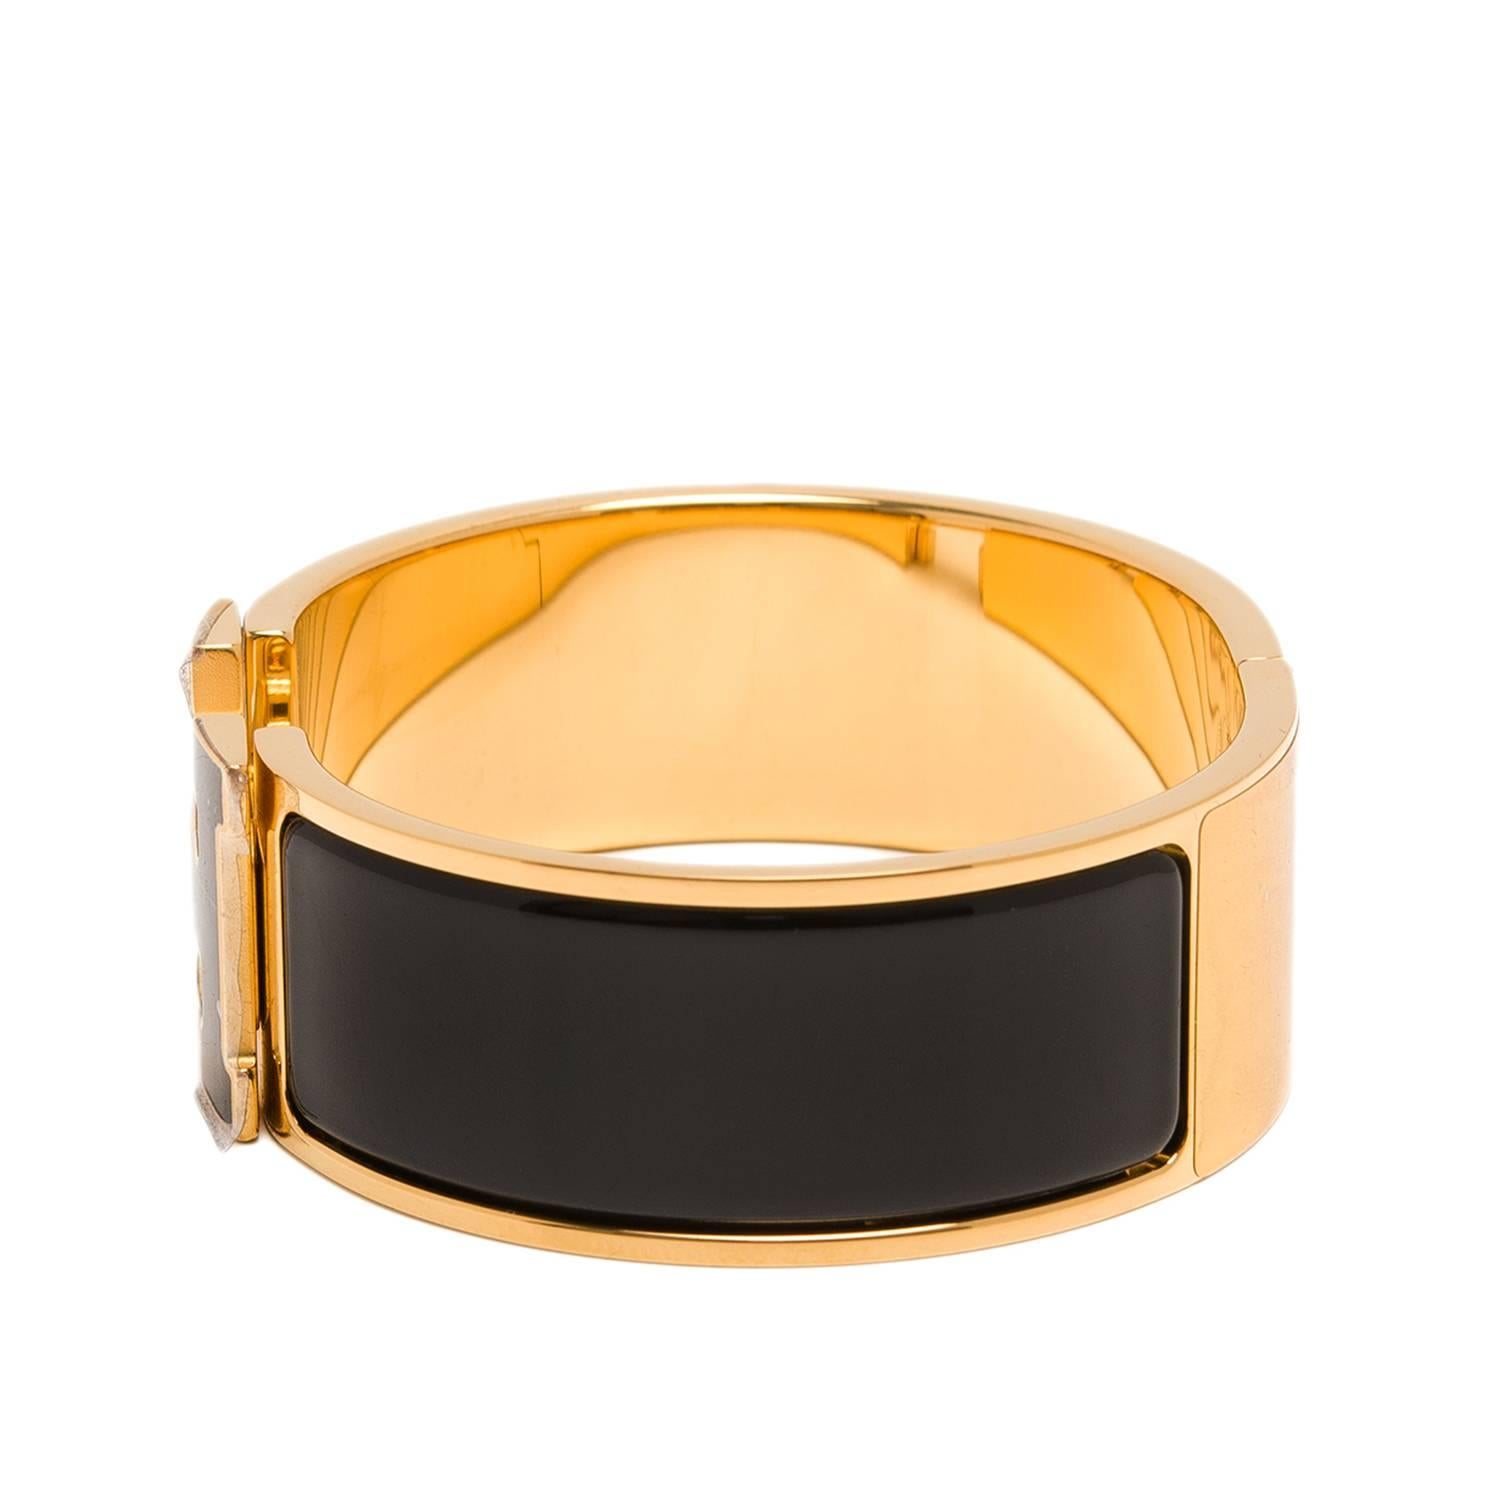 Hermes wide Clic Clac H bracelet in black enamel with black enamel H and gold plated hardware in size PM.

Origin: France

Condition: Never worn

Accompanied by: Hermes box, Hermes dustbag, carebook, ribbon

Measurements: Diameter: 2.25